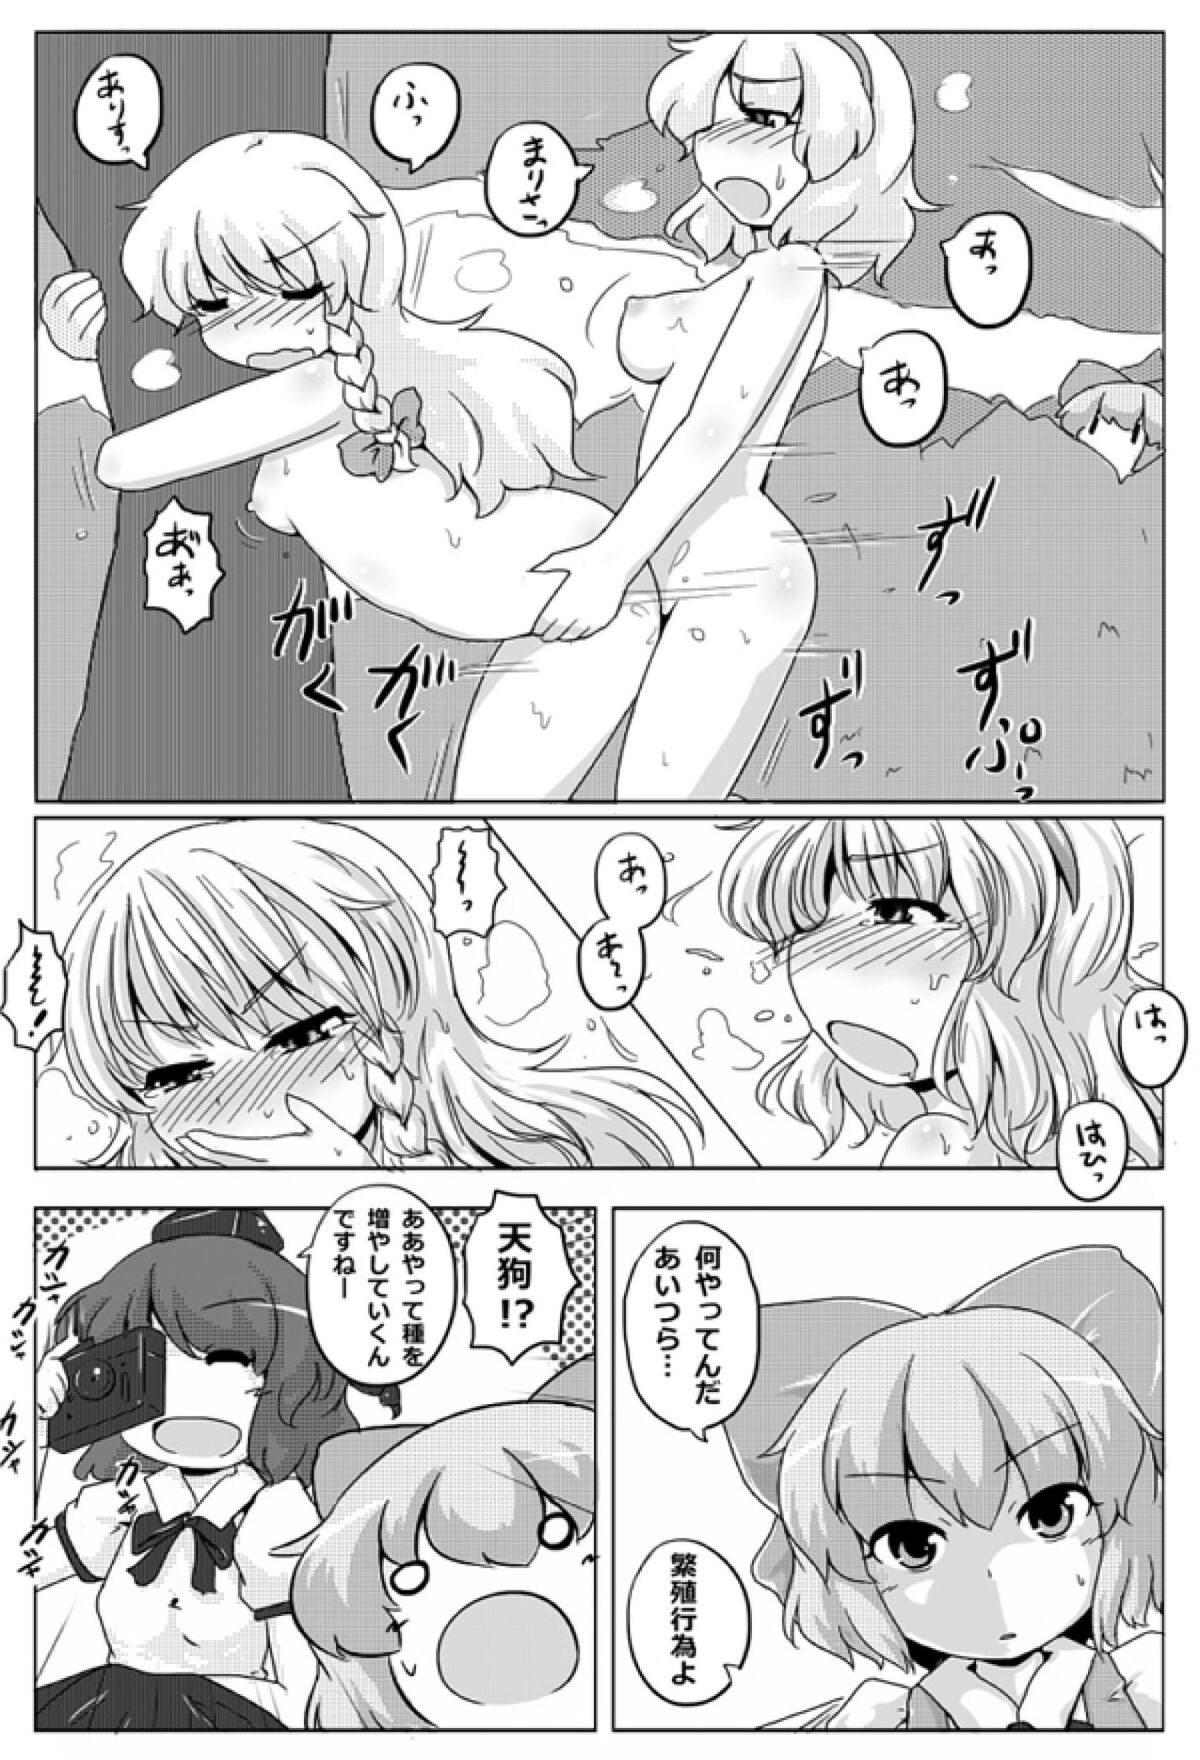 [GOLD LEAF (Sukedai)] Cirno Spoiler (Touhou Project) [Digital] page 6 full